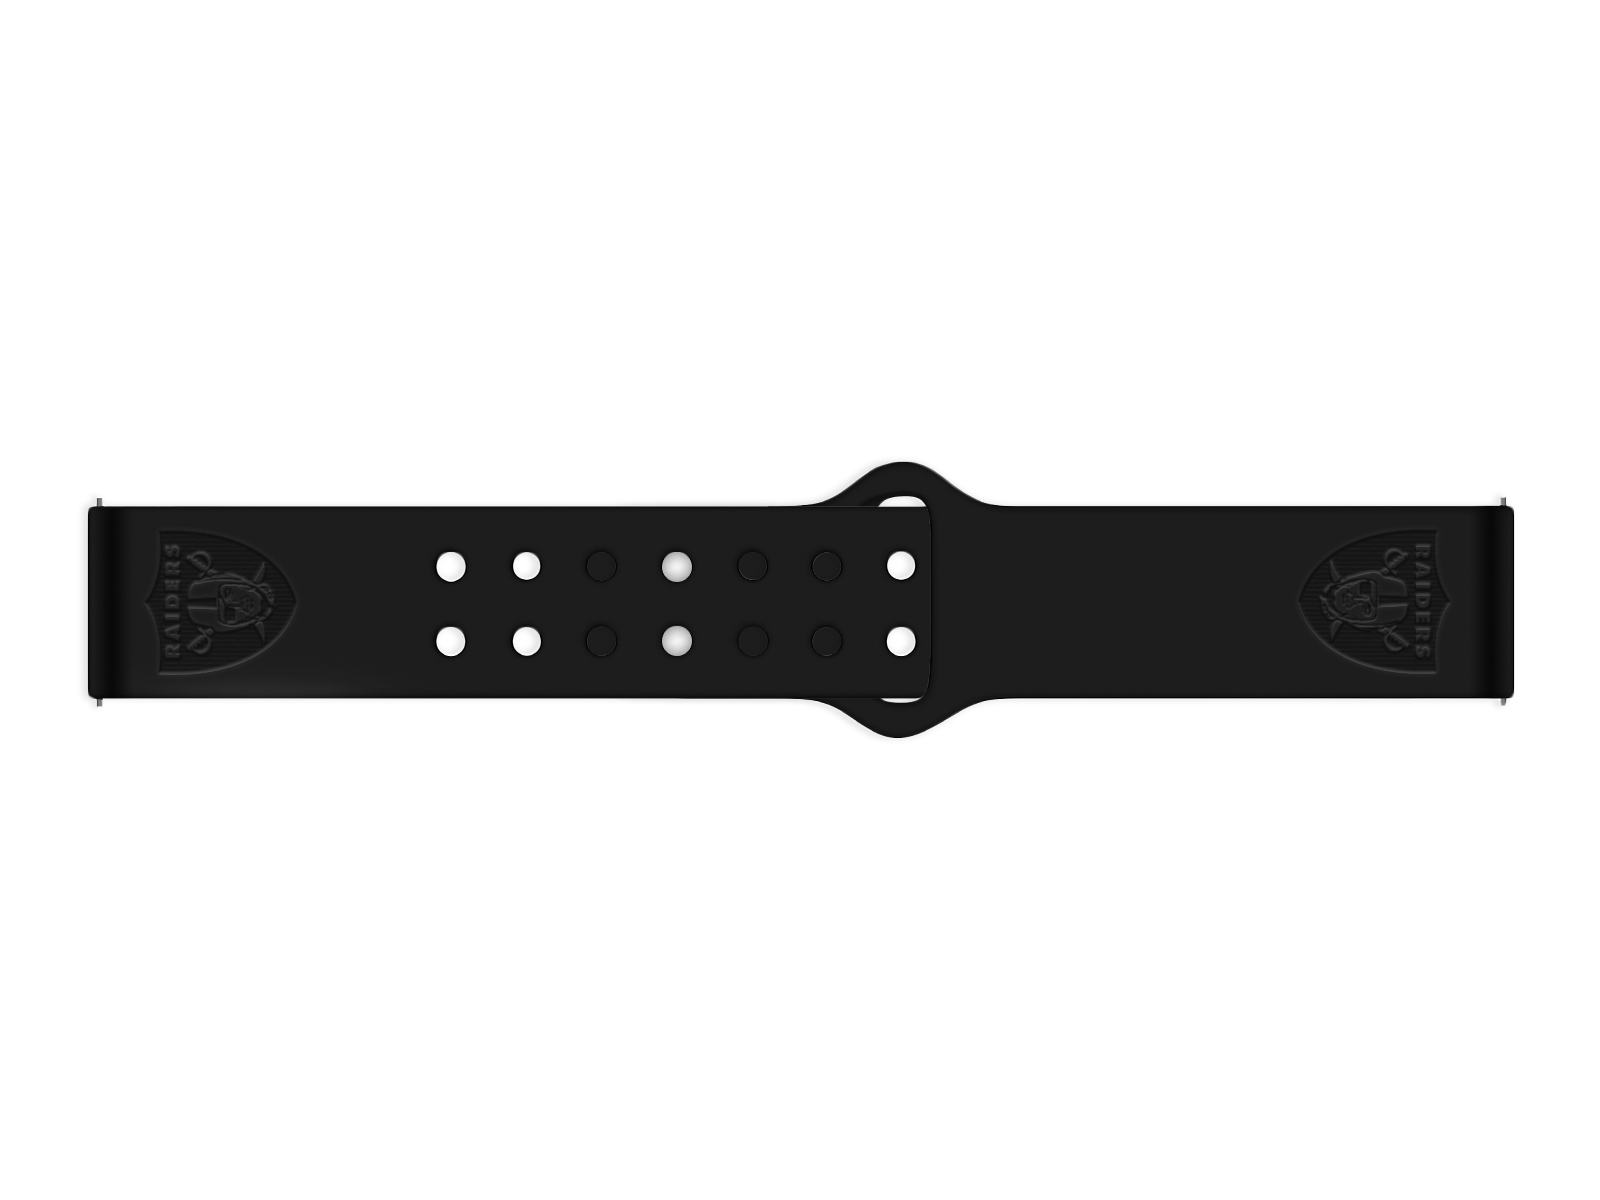 Las Vegas Raiders HD Watch Band Compatible with Samsung Galaxy Watch and  more